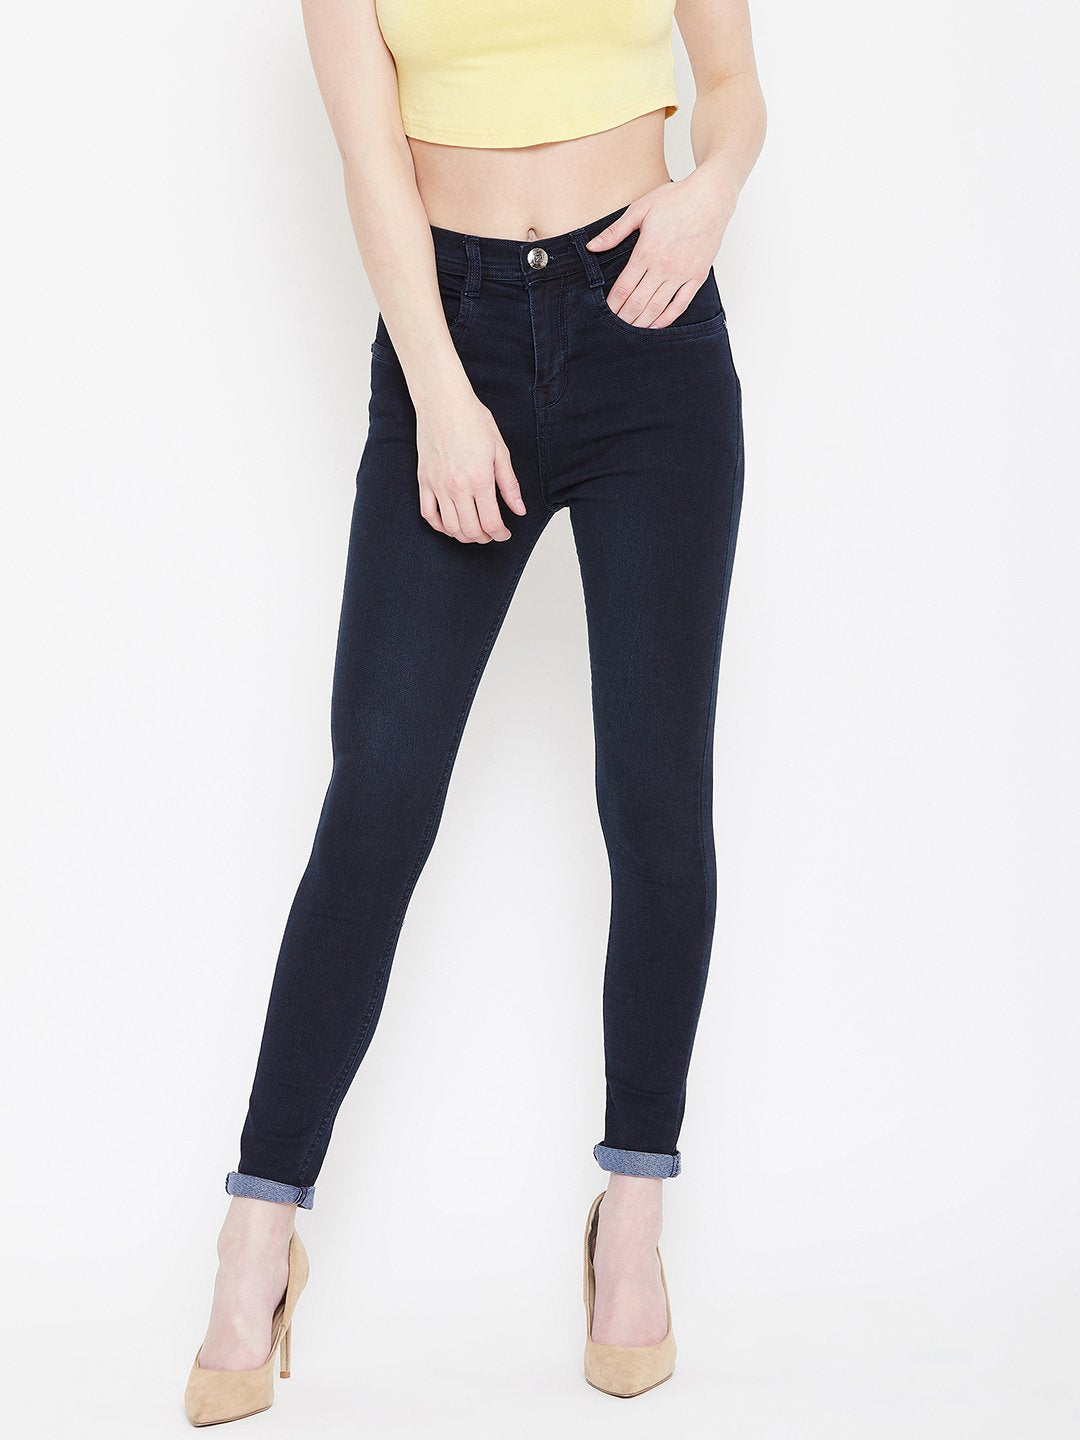 High Waist Stretchable Carbon Blue Jeans - NiftyJeans